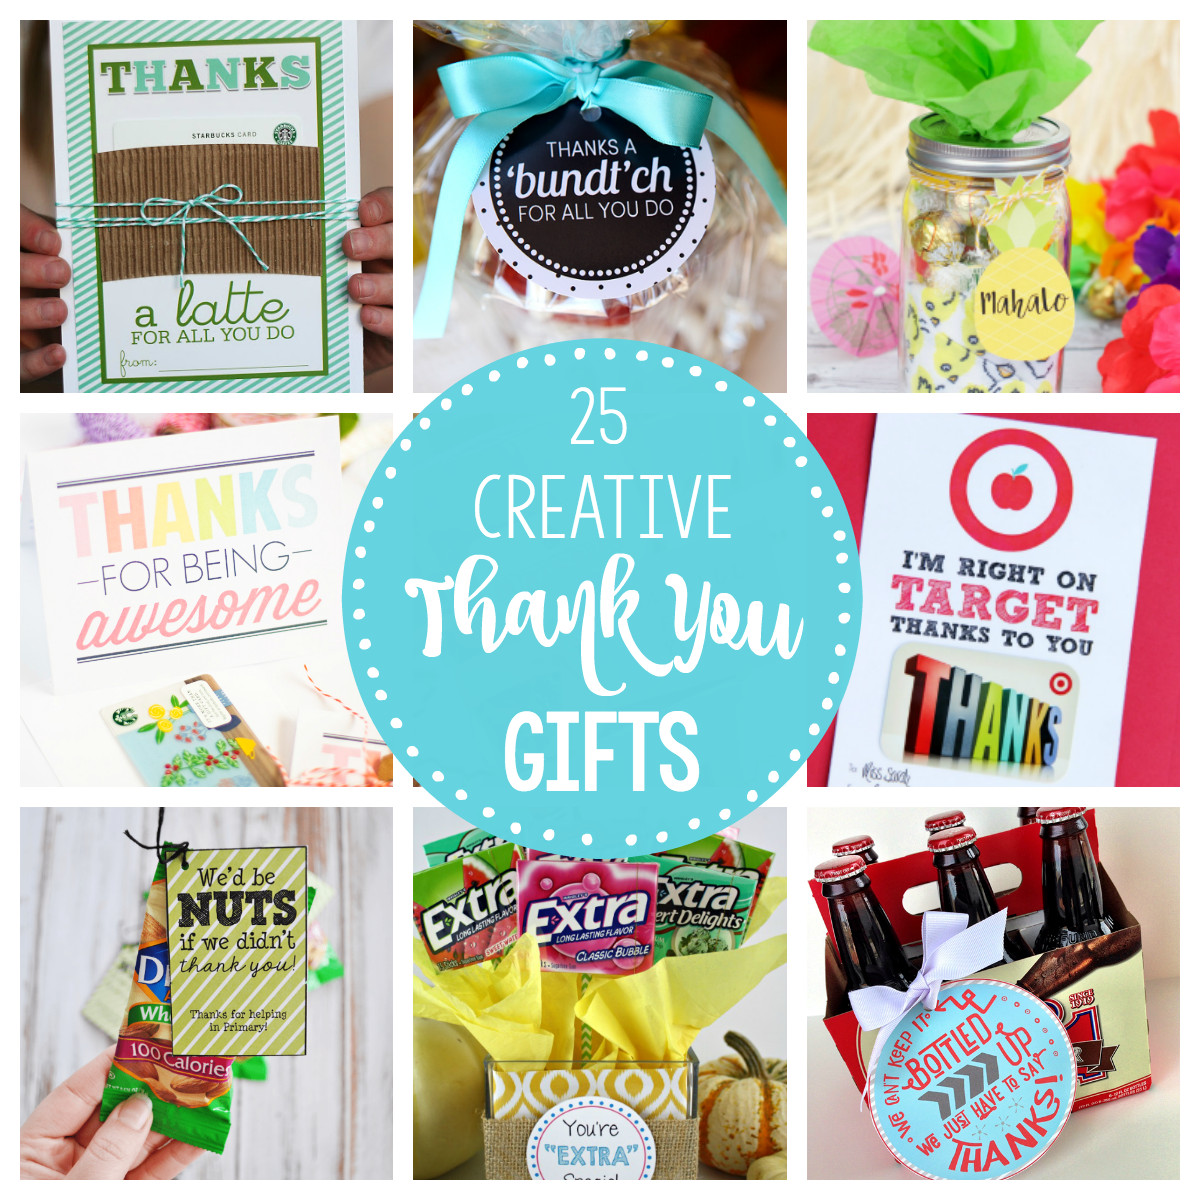 Friend Thank You Gift Ideas
 25 Creative & Unique Thank You Gifts – Fun Squared